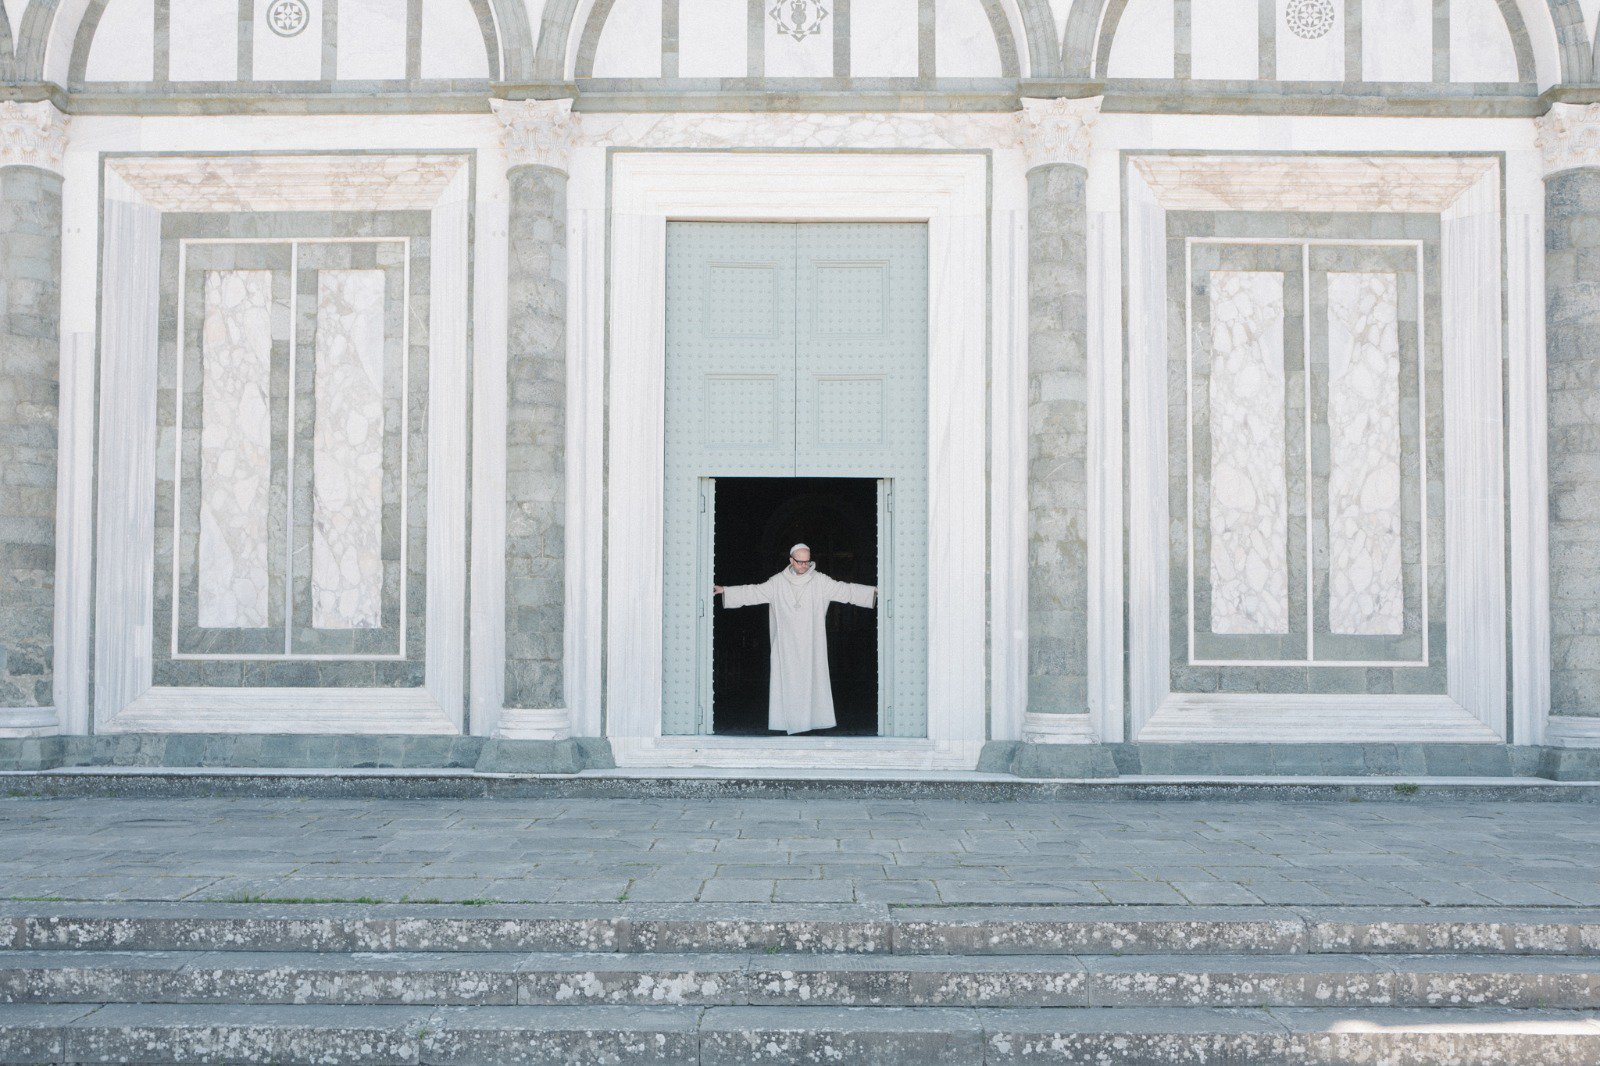 Cover Image for Covid-19 Times, A Tourist-less Florence